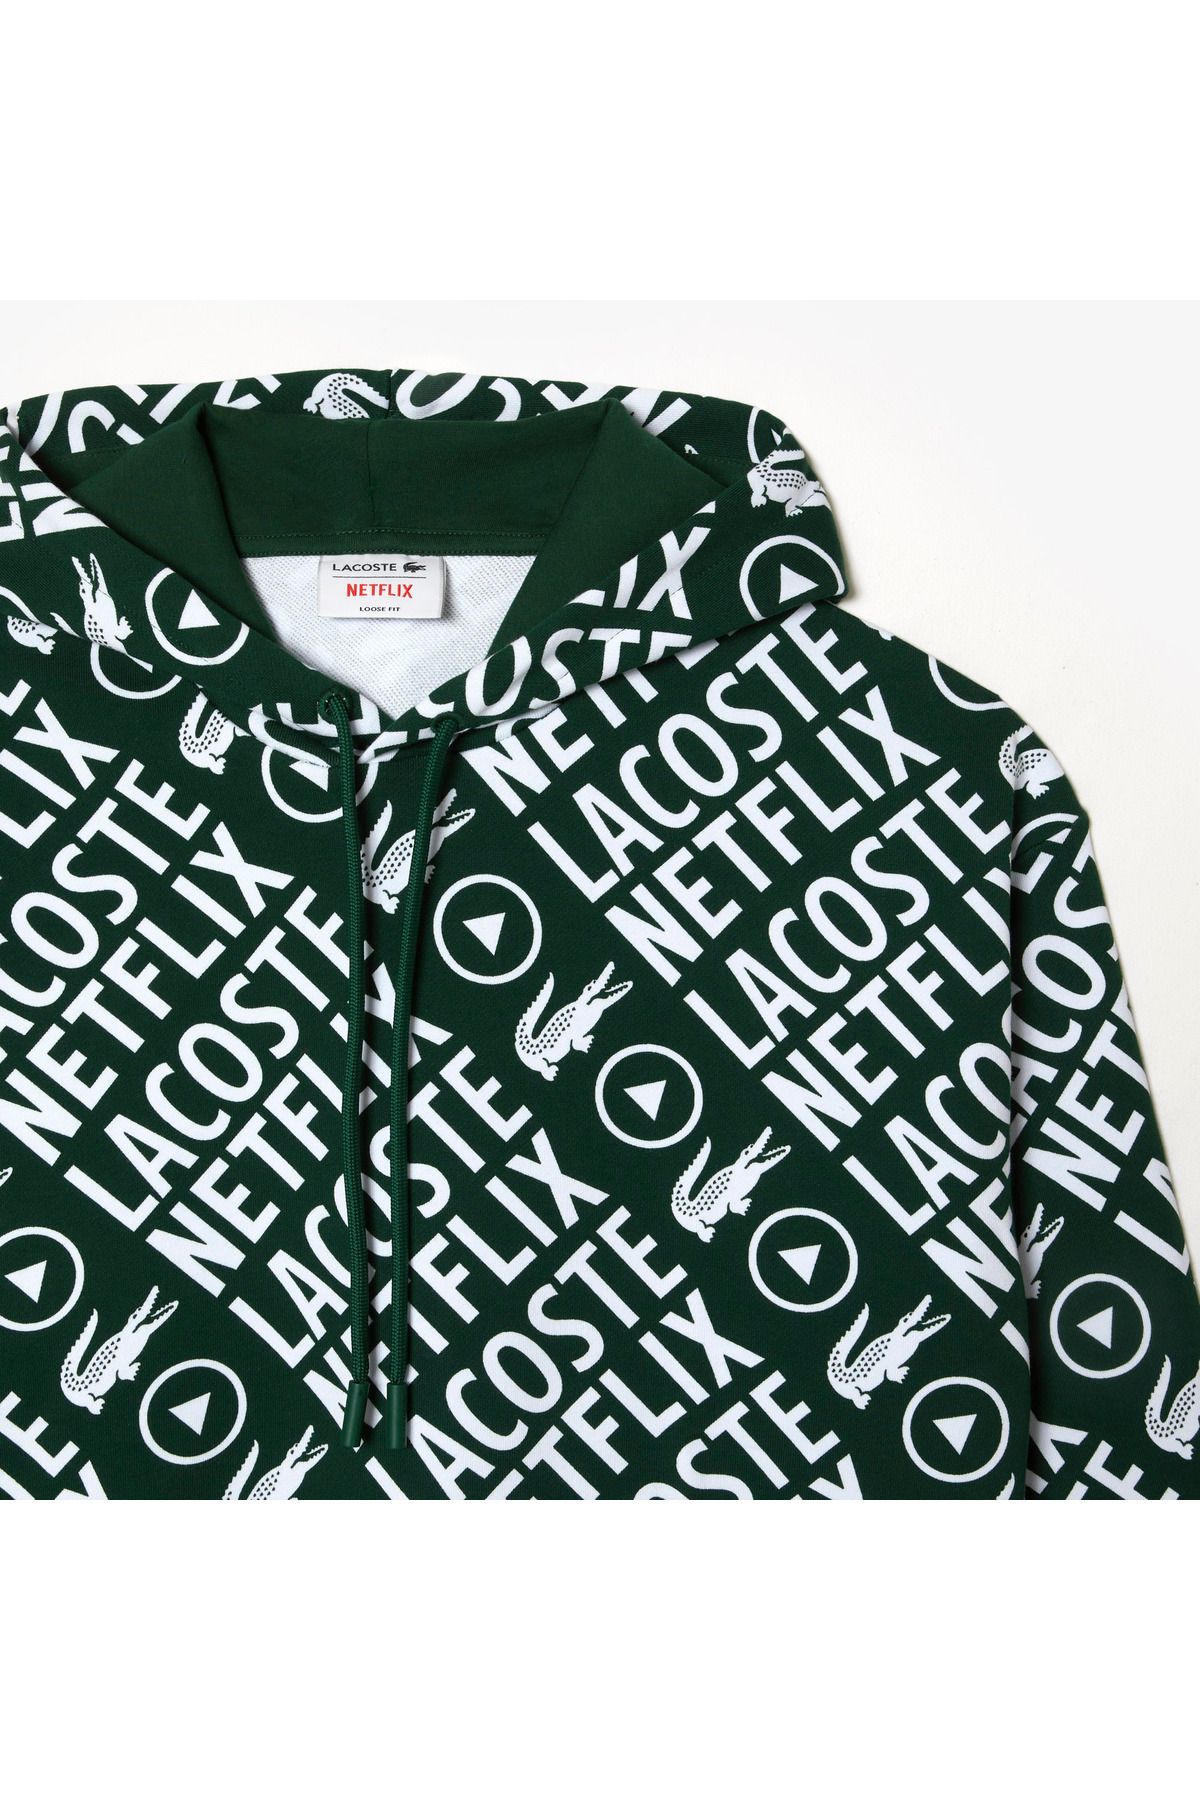 Lacoste X Netflix Men's Loose Fit Hasted Sweatryrt